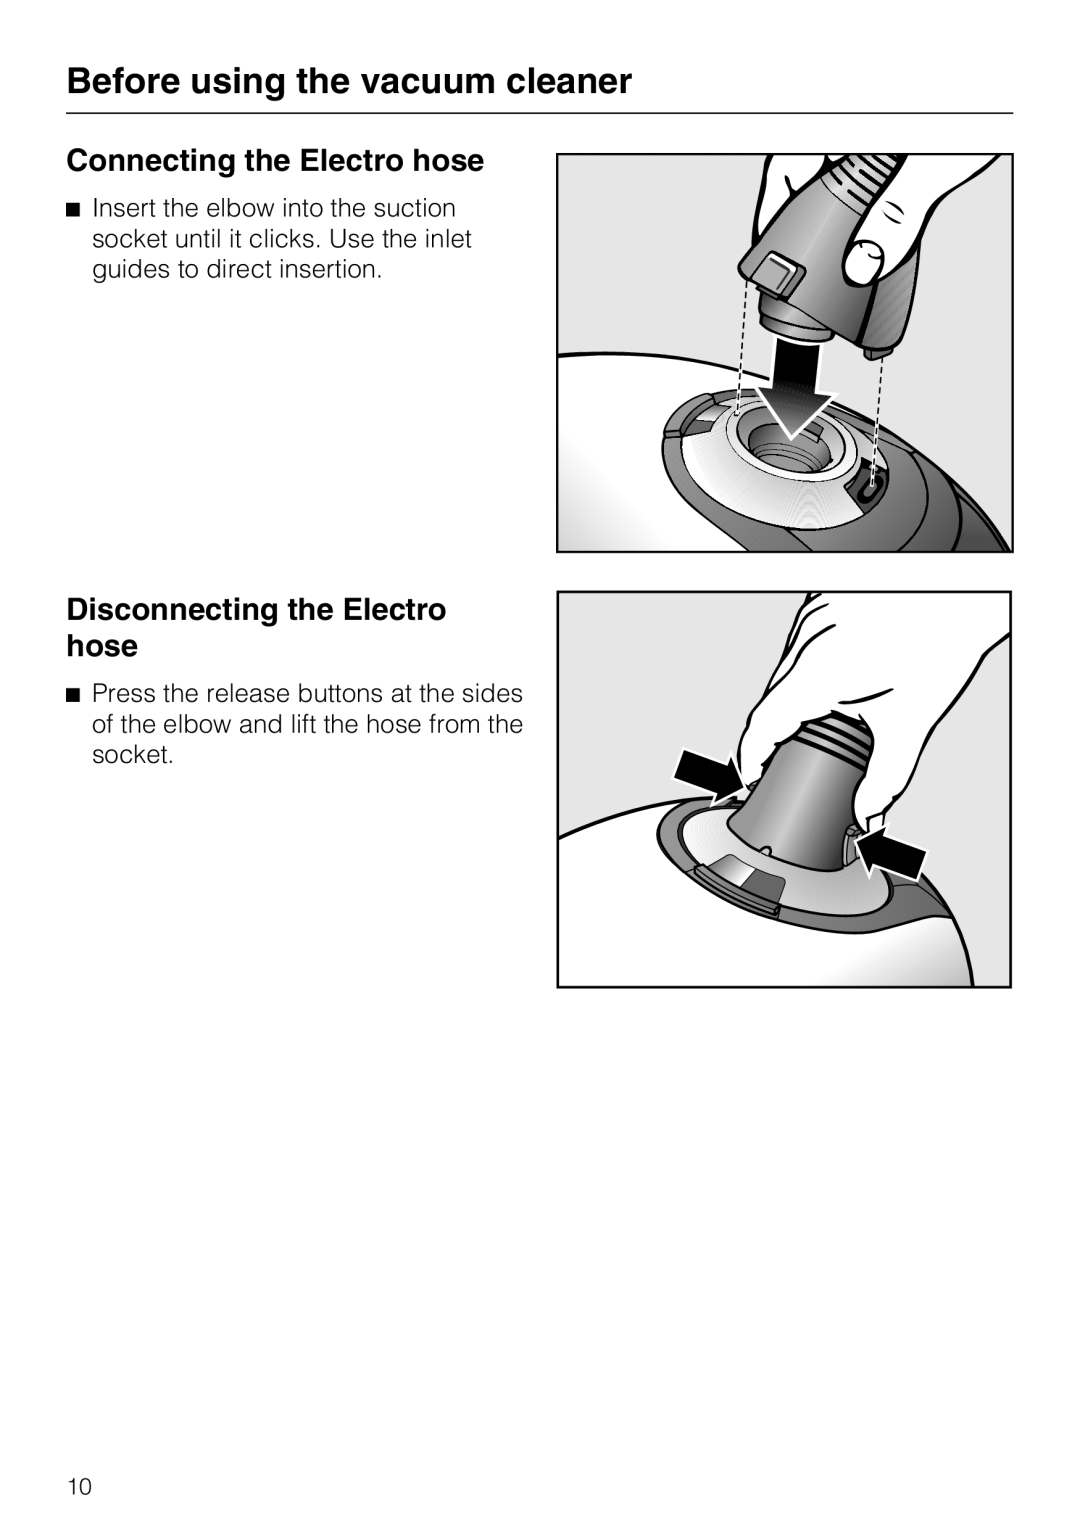 Miele S 5981 manual Before using the vacuum cleaner, Connecting the Electro hose, Disconnecting the Electro hose 